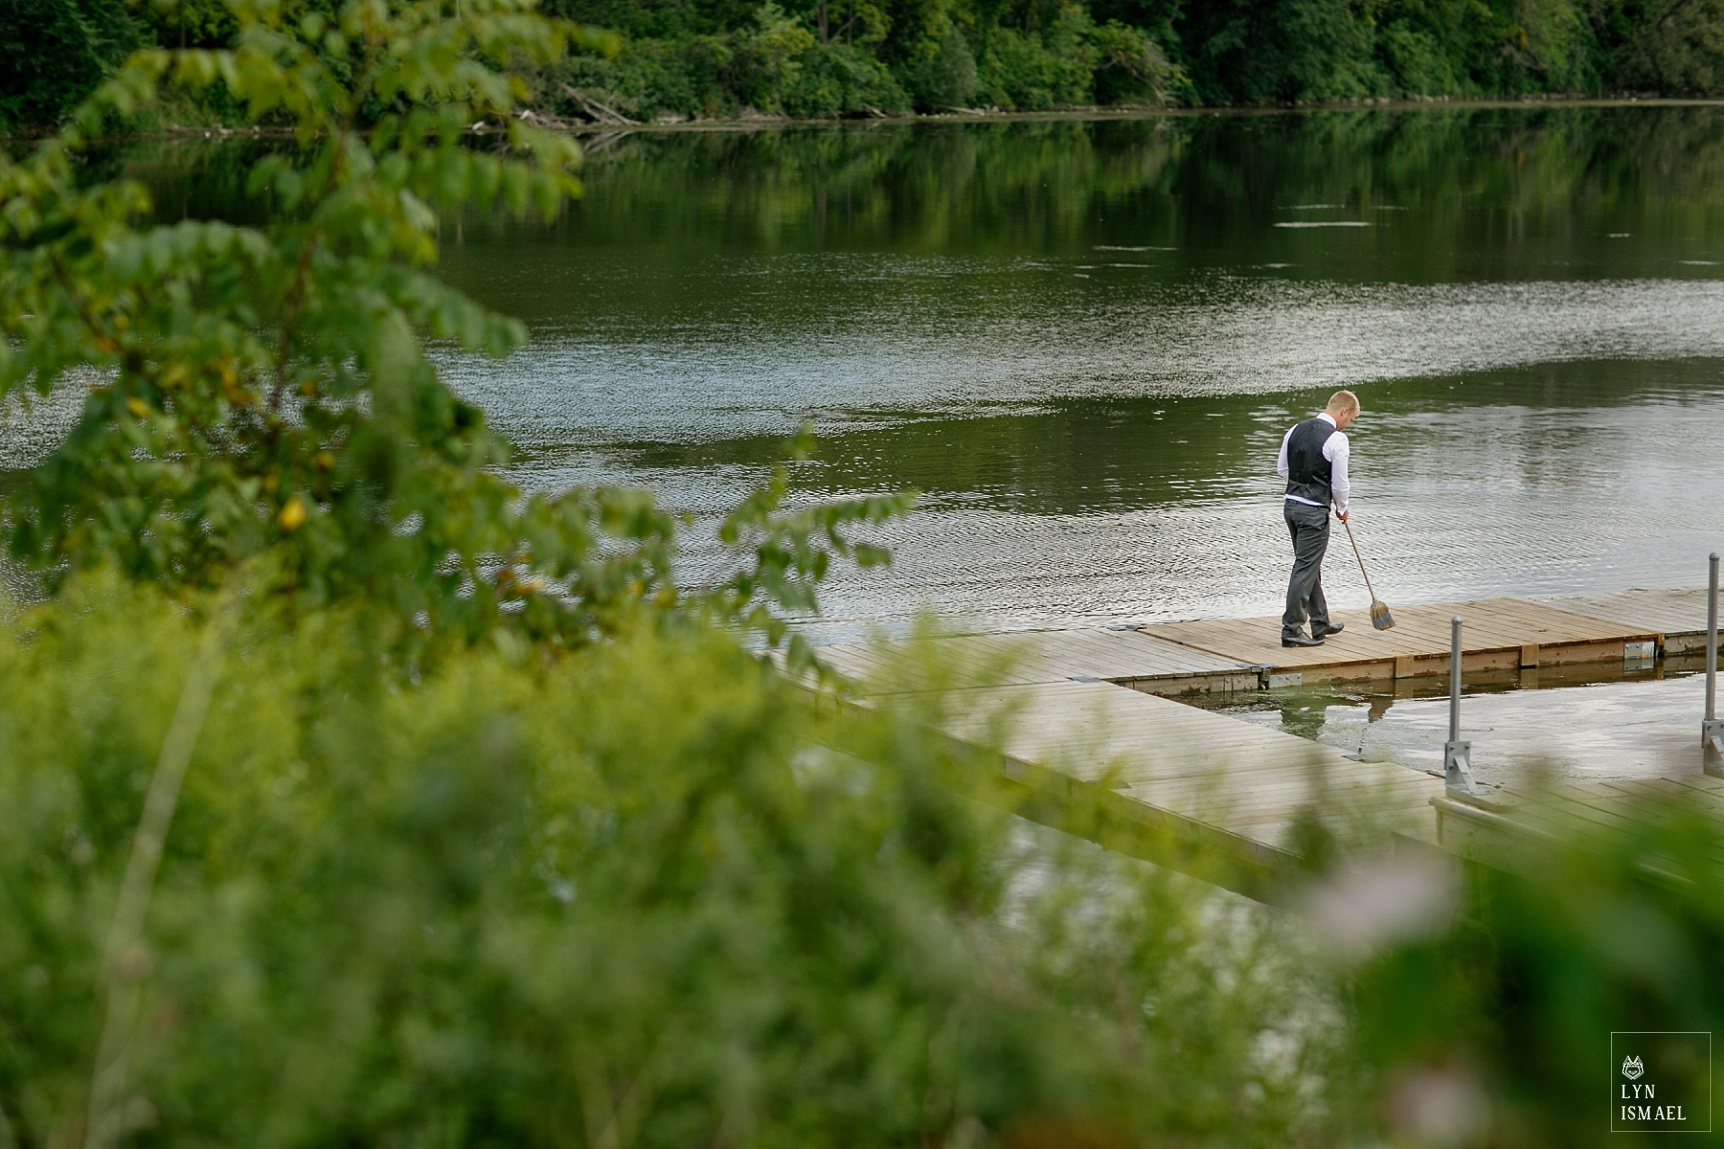 Groomsman cleans the dock of geese droppings before the bride and groom's first look.